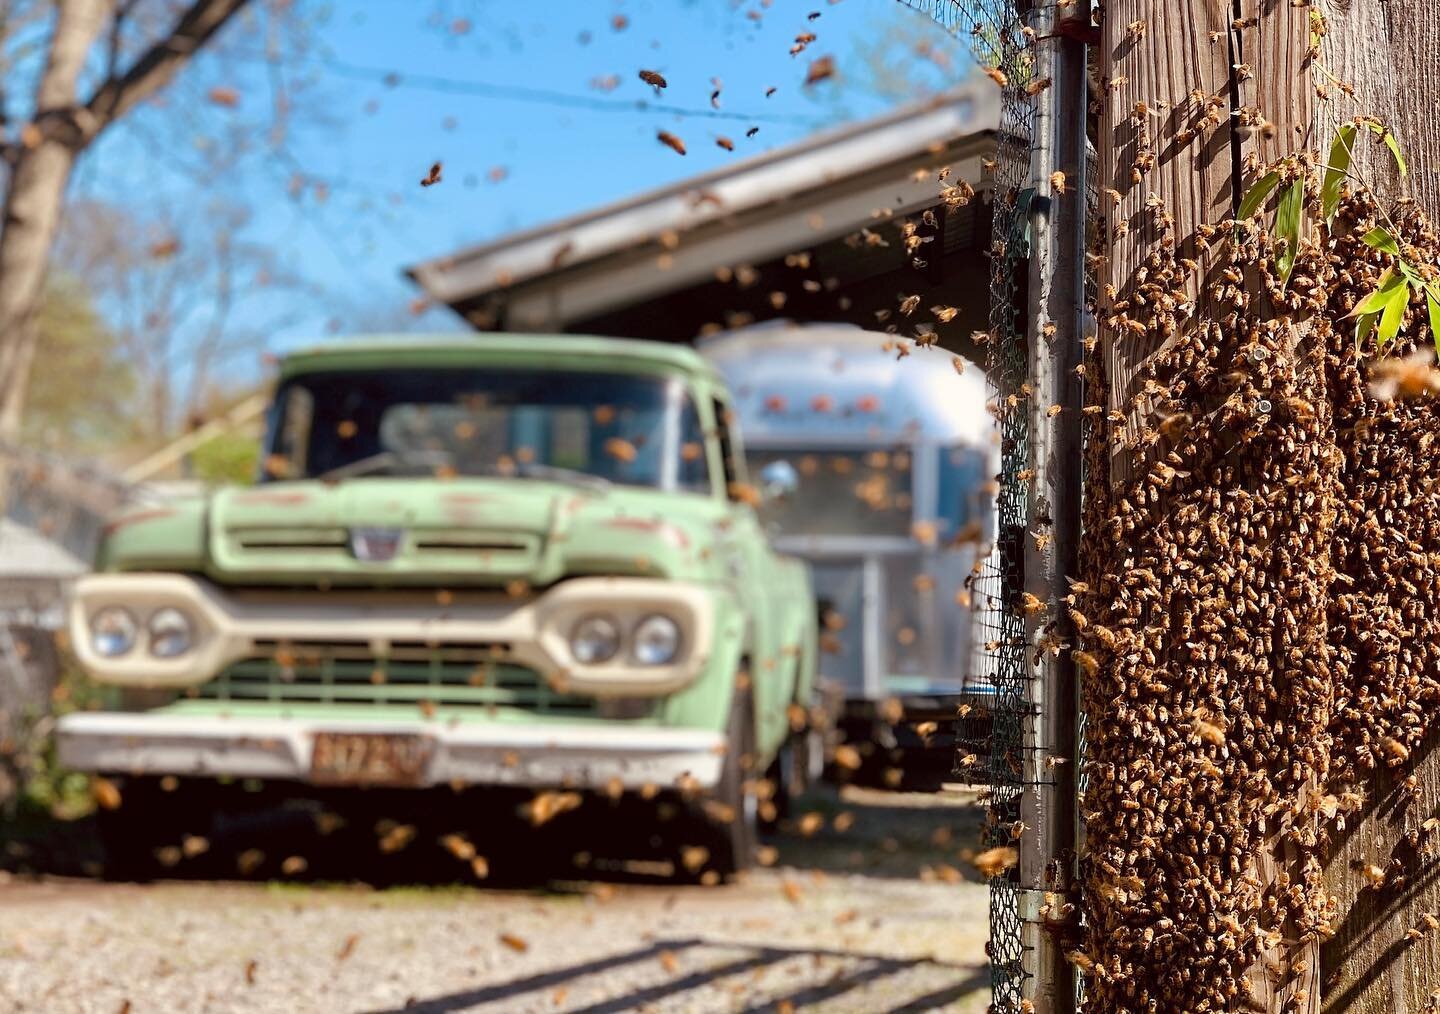 Swarm season is just around the corner and we couldn&rsquo;t be more excited for this time of year! The bees kick it into high gear and expand their hives. As beekeepers we either stay ahead of them through swarm management or we chase them from behi